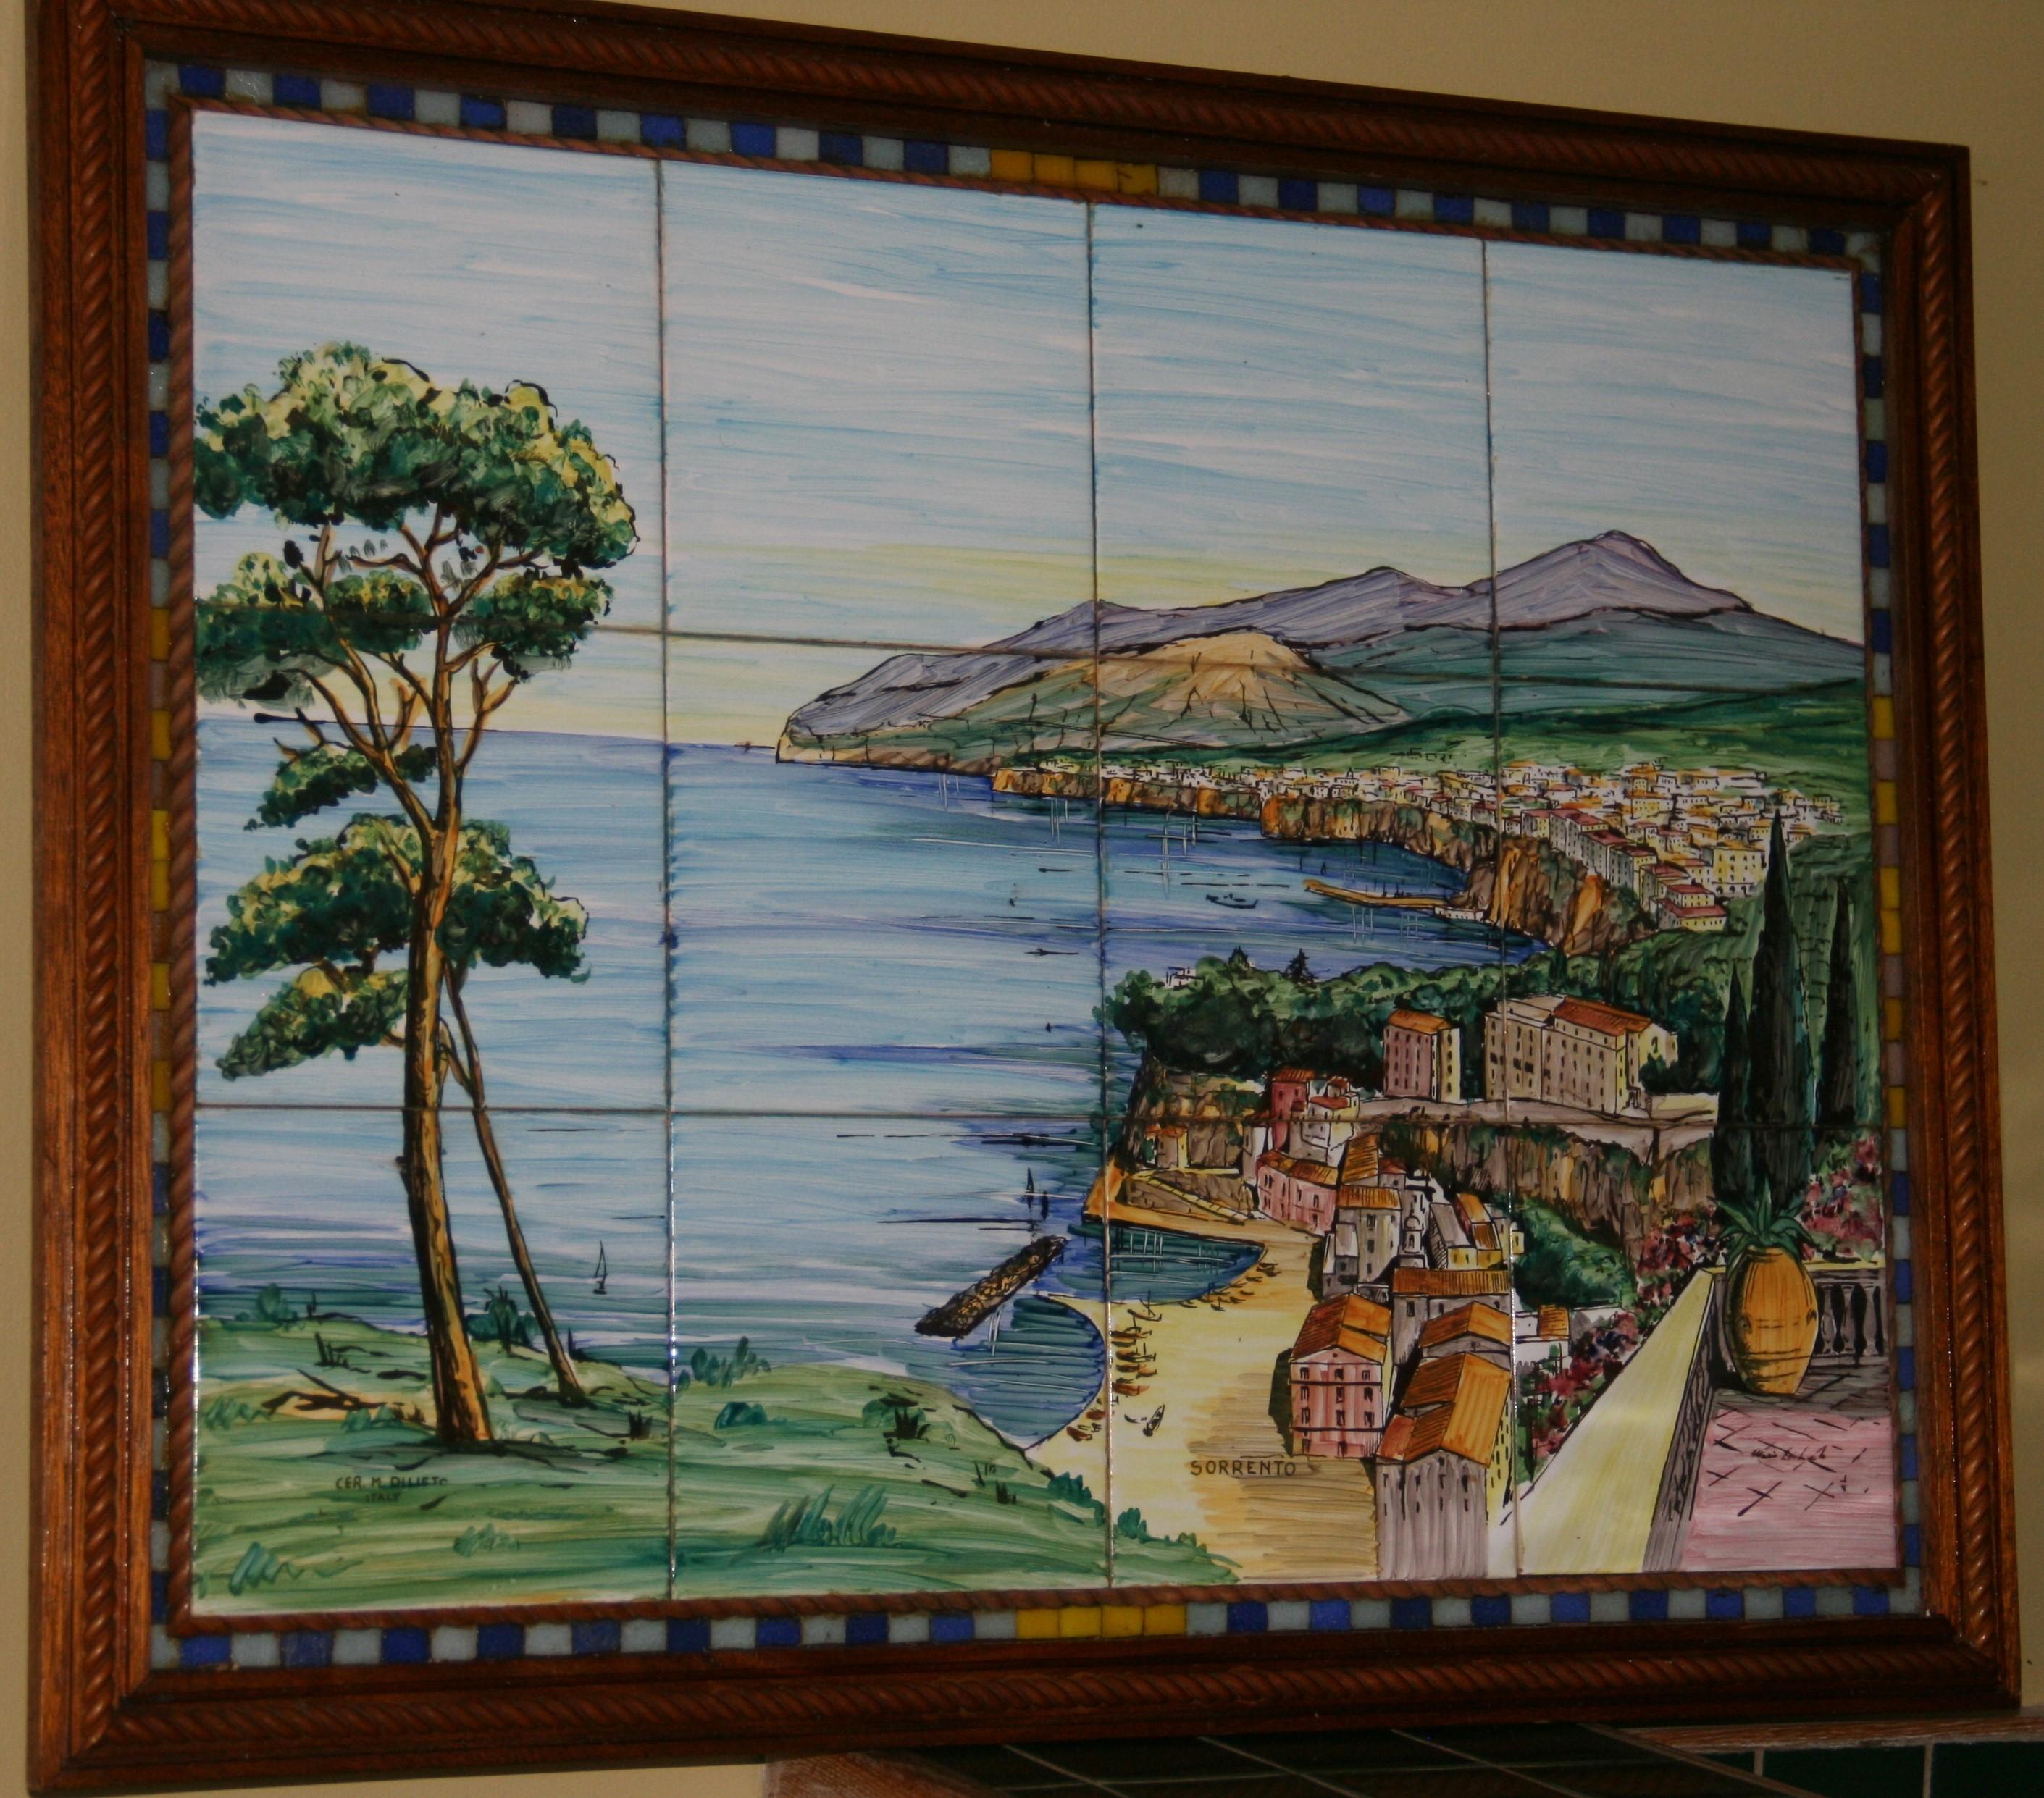 Unknown Landscape Painting - Italian Hand Painted Wall Tile Wall Art "Sorrento Italy" 